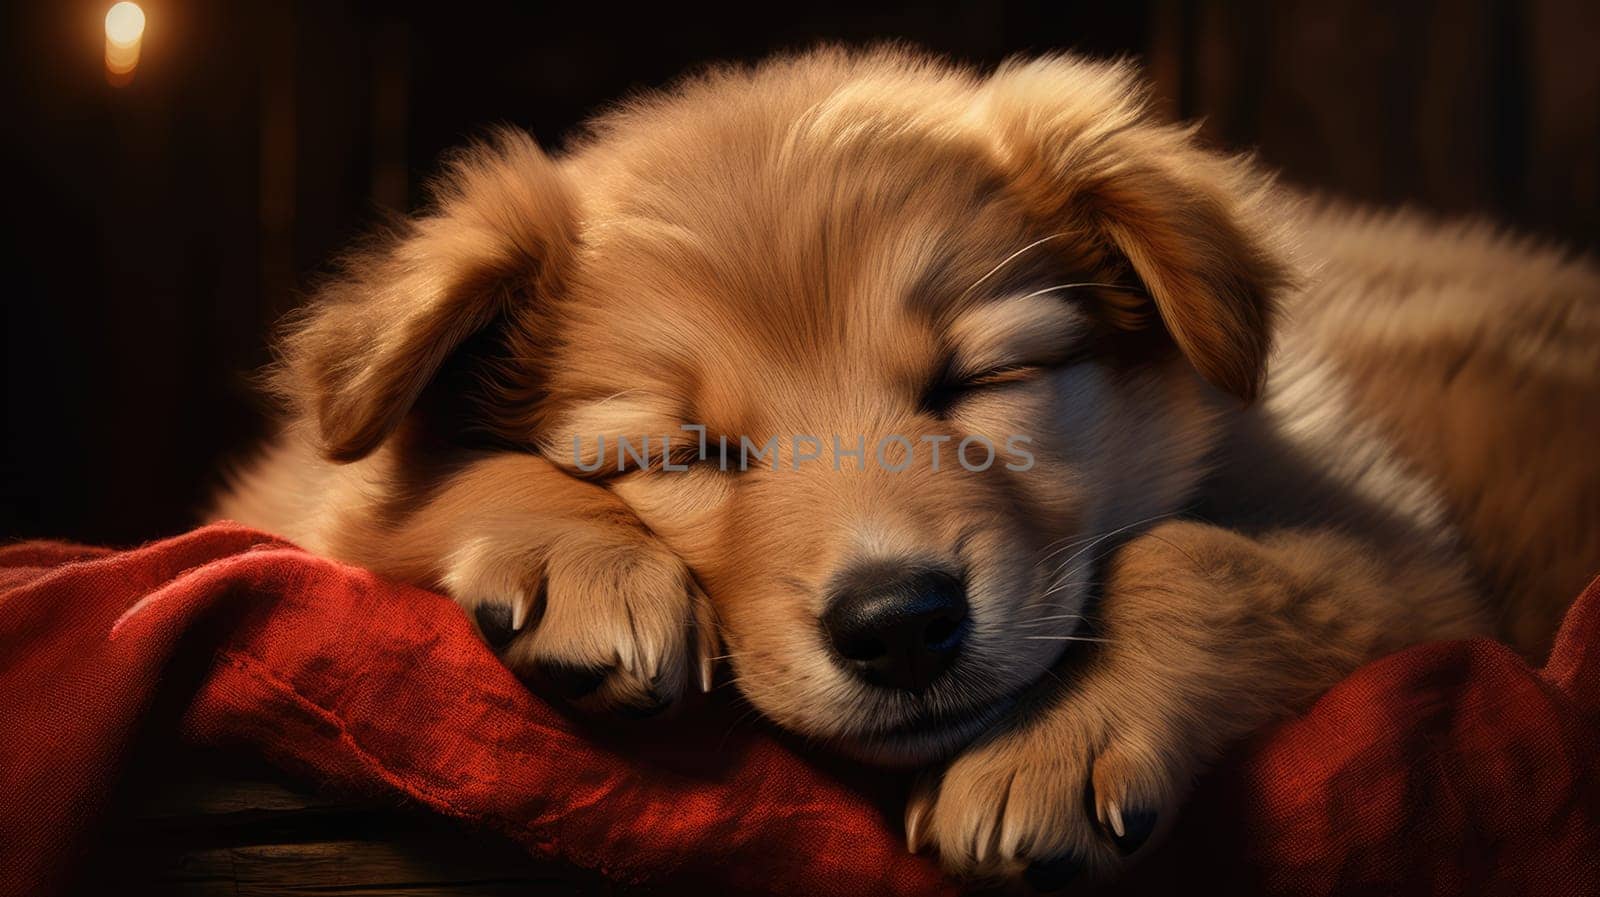 Cute puppy sleeping peacefully on soft yellow bed. Small dog is resting at home by JuliaDorian